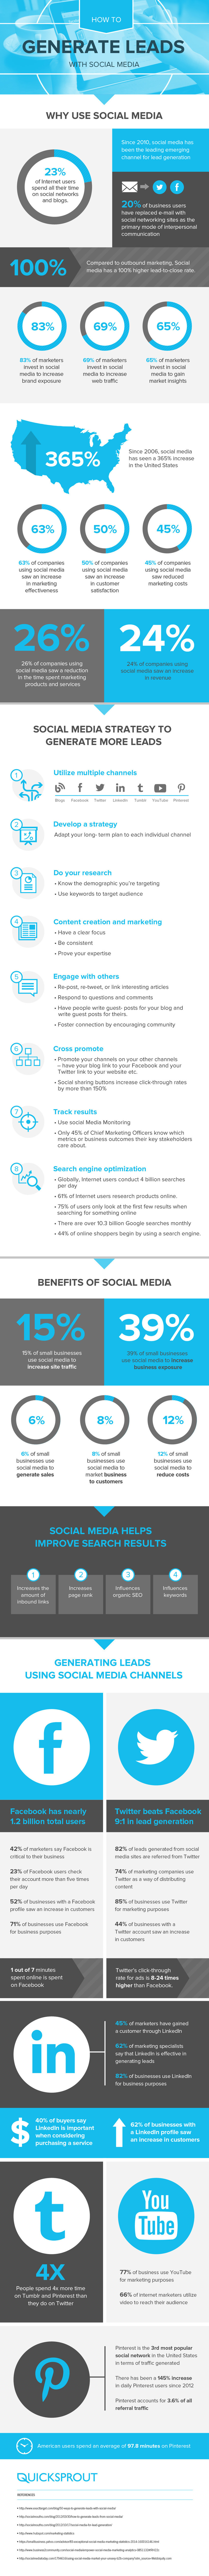 Infographic: How to Generate Leads with Social Media - CrazyEgg | The MarTech Digest | Scoop.it